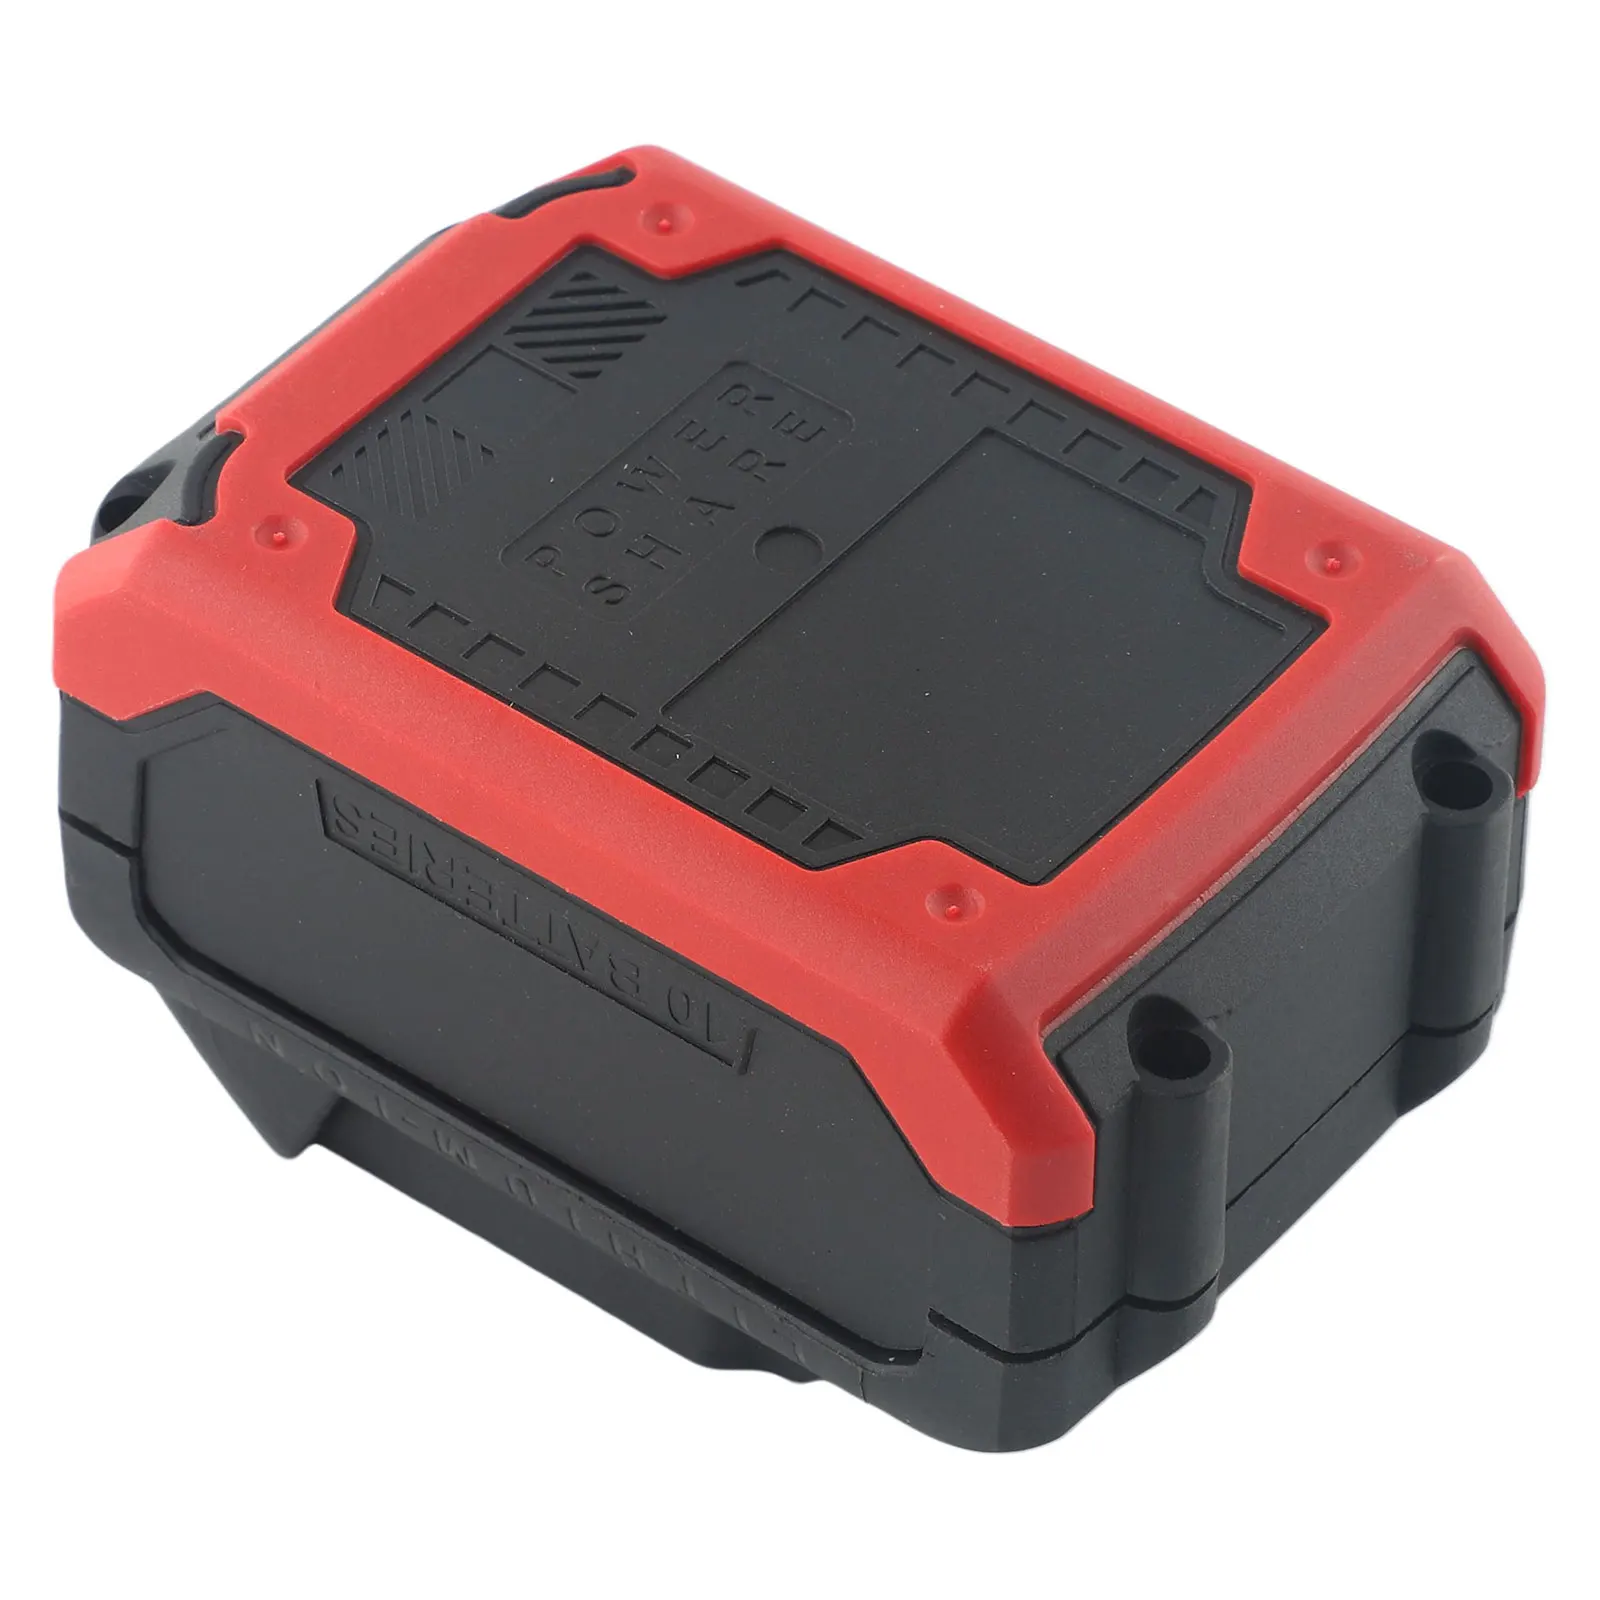 Cores Plastic Battery Case Storage Box Shell PCB Charging Board For Makita Battery Case Power Tool Accessories for galaxy a71 sm a715f charging port board